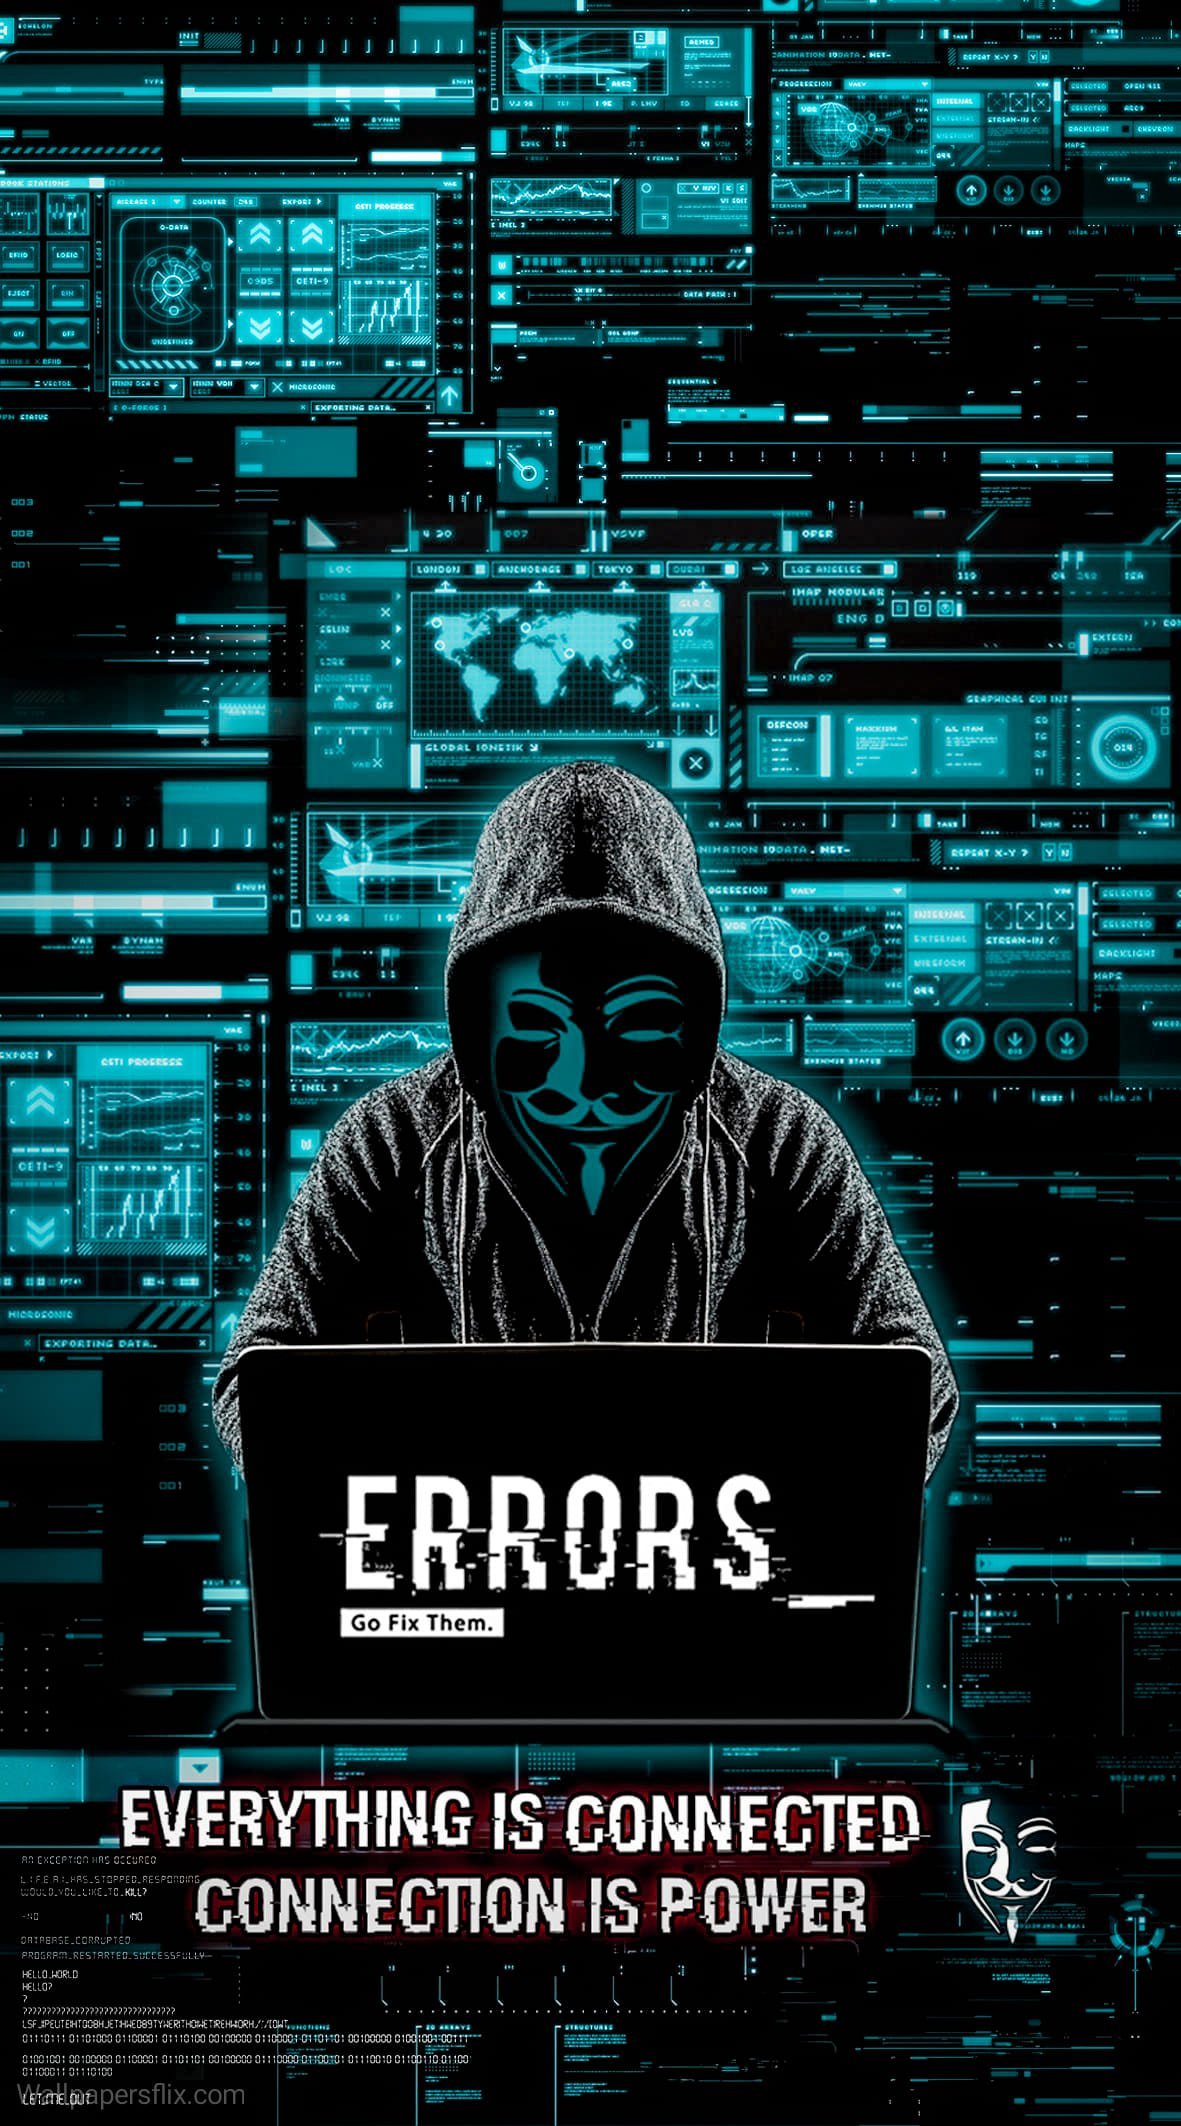 ethical hacking wallpaper